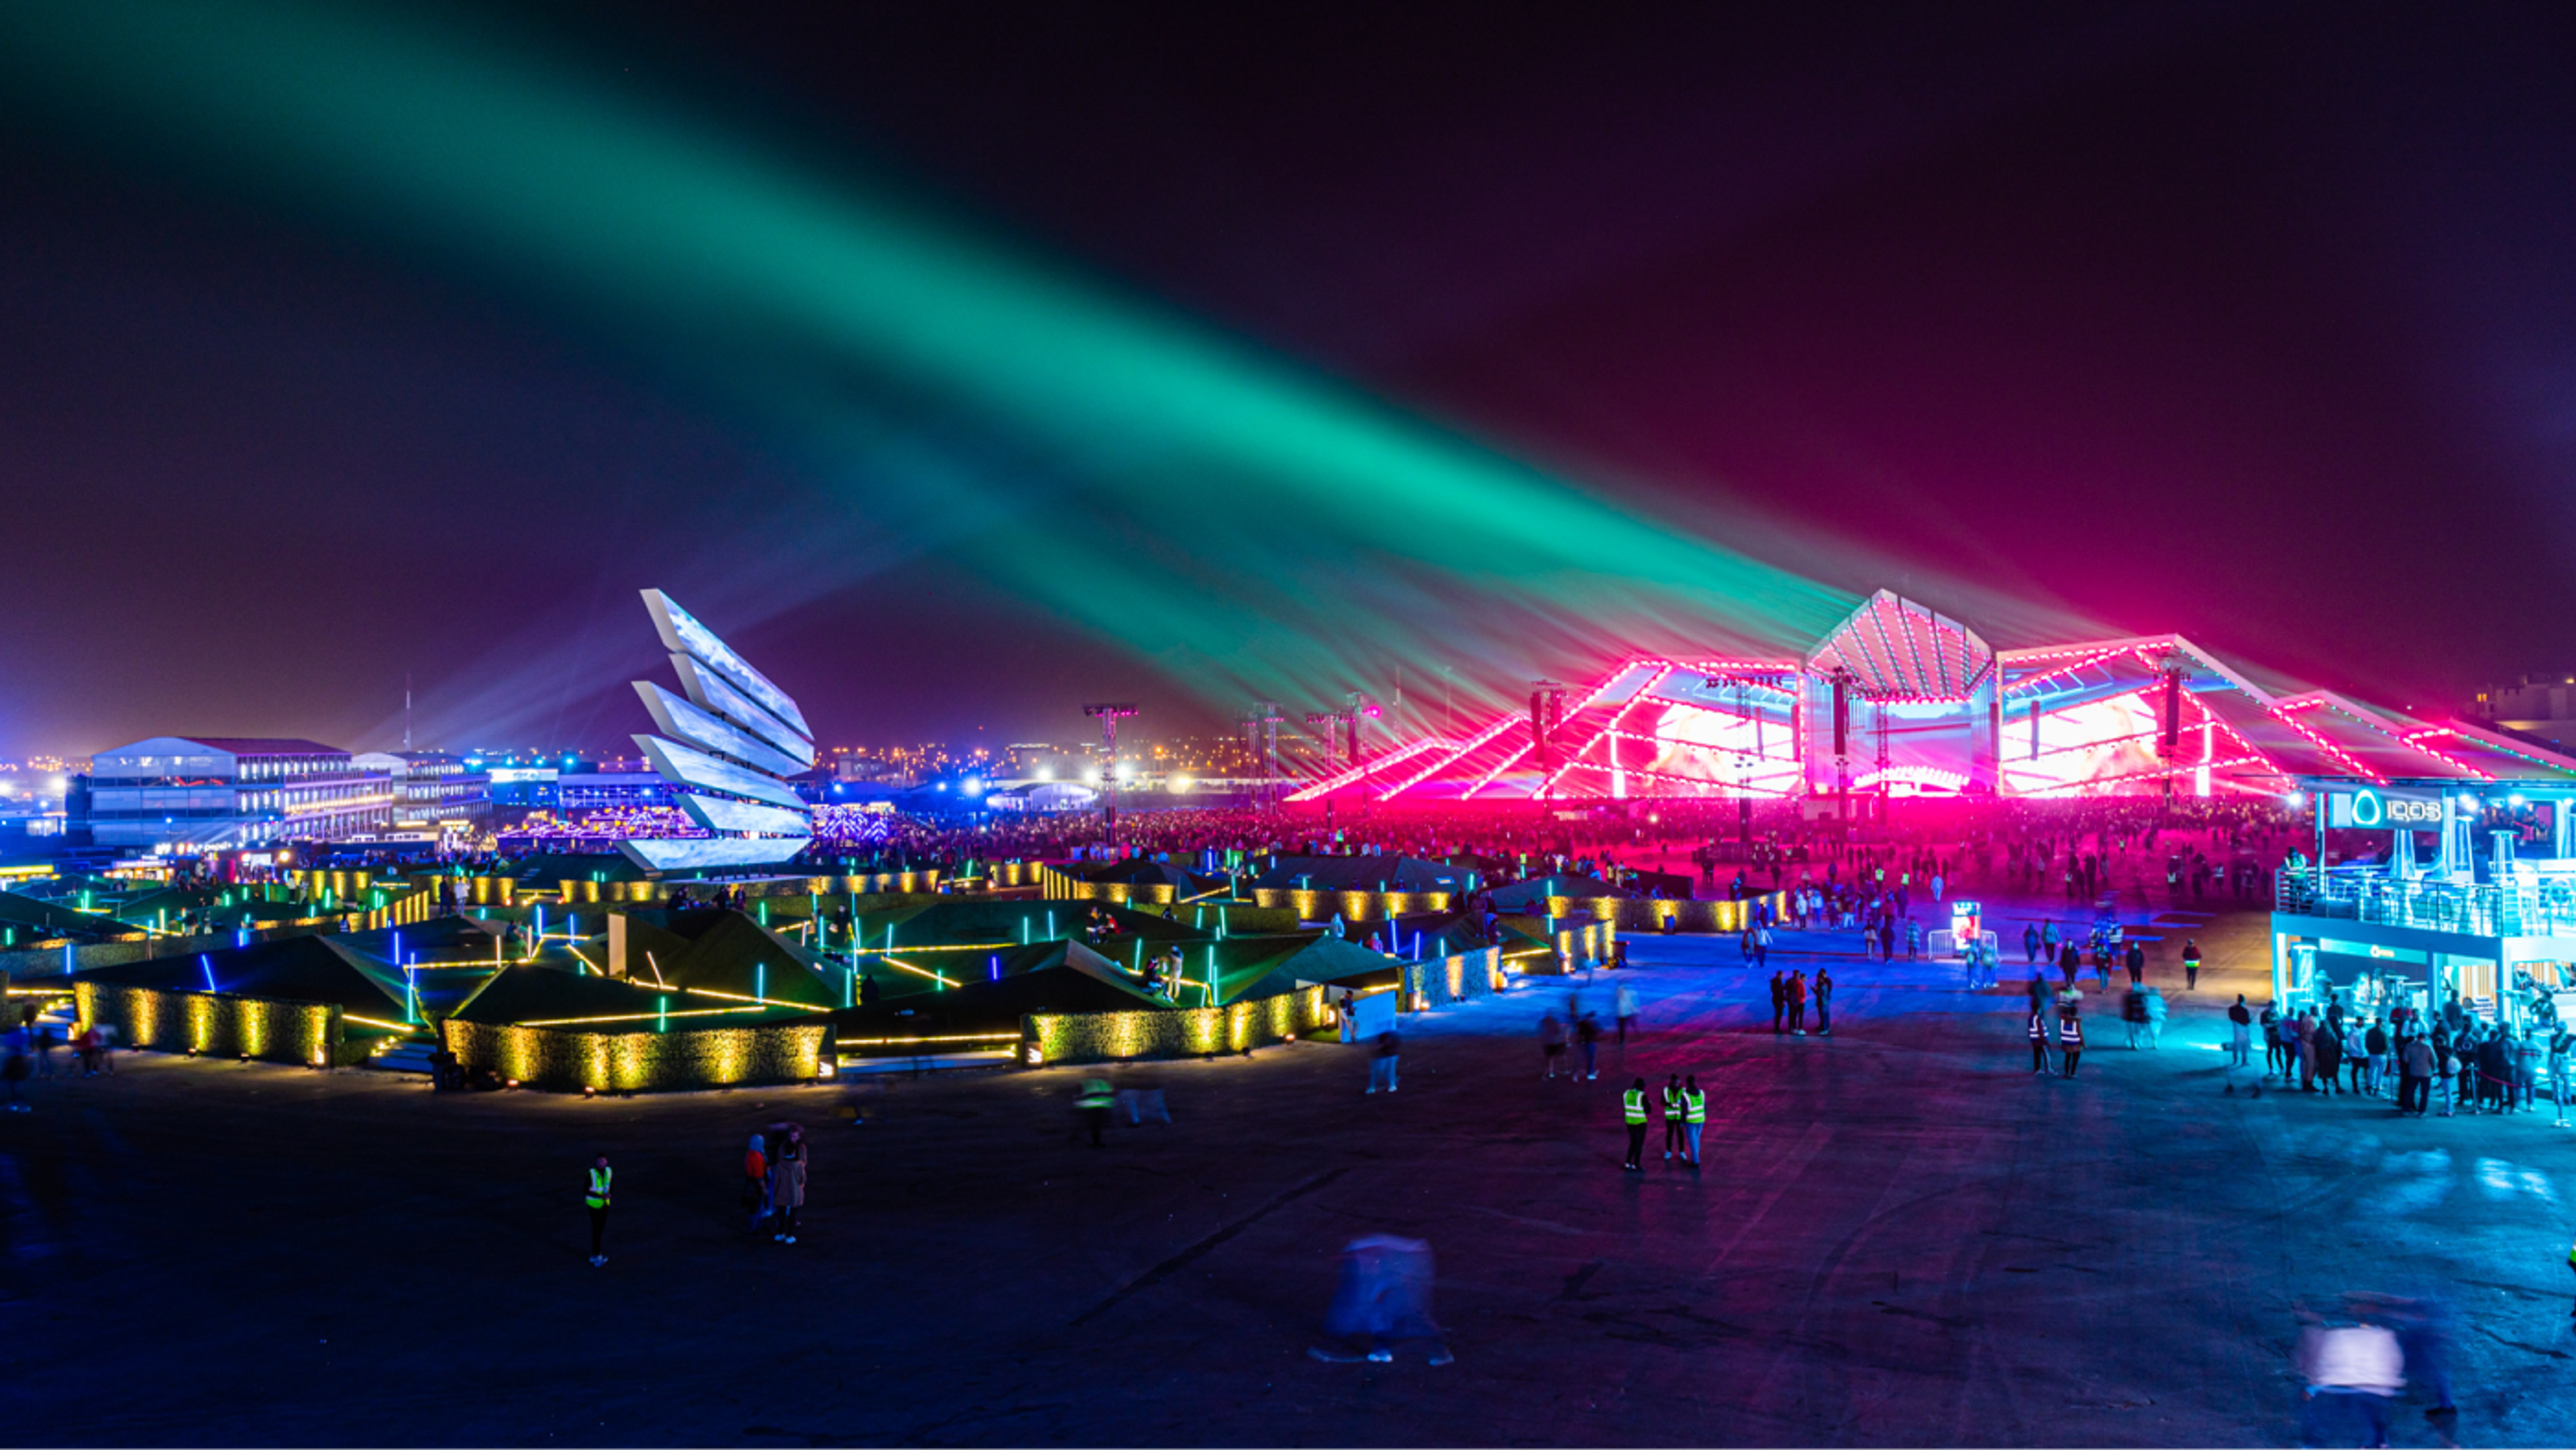 landscape image of soundstorm festival at night with a variety of colorful lights